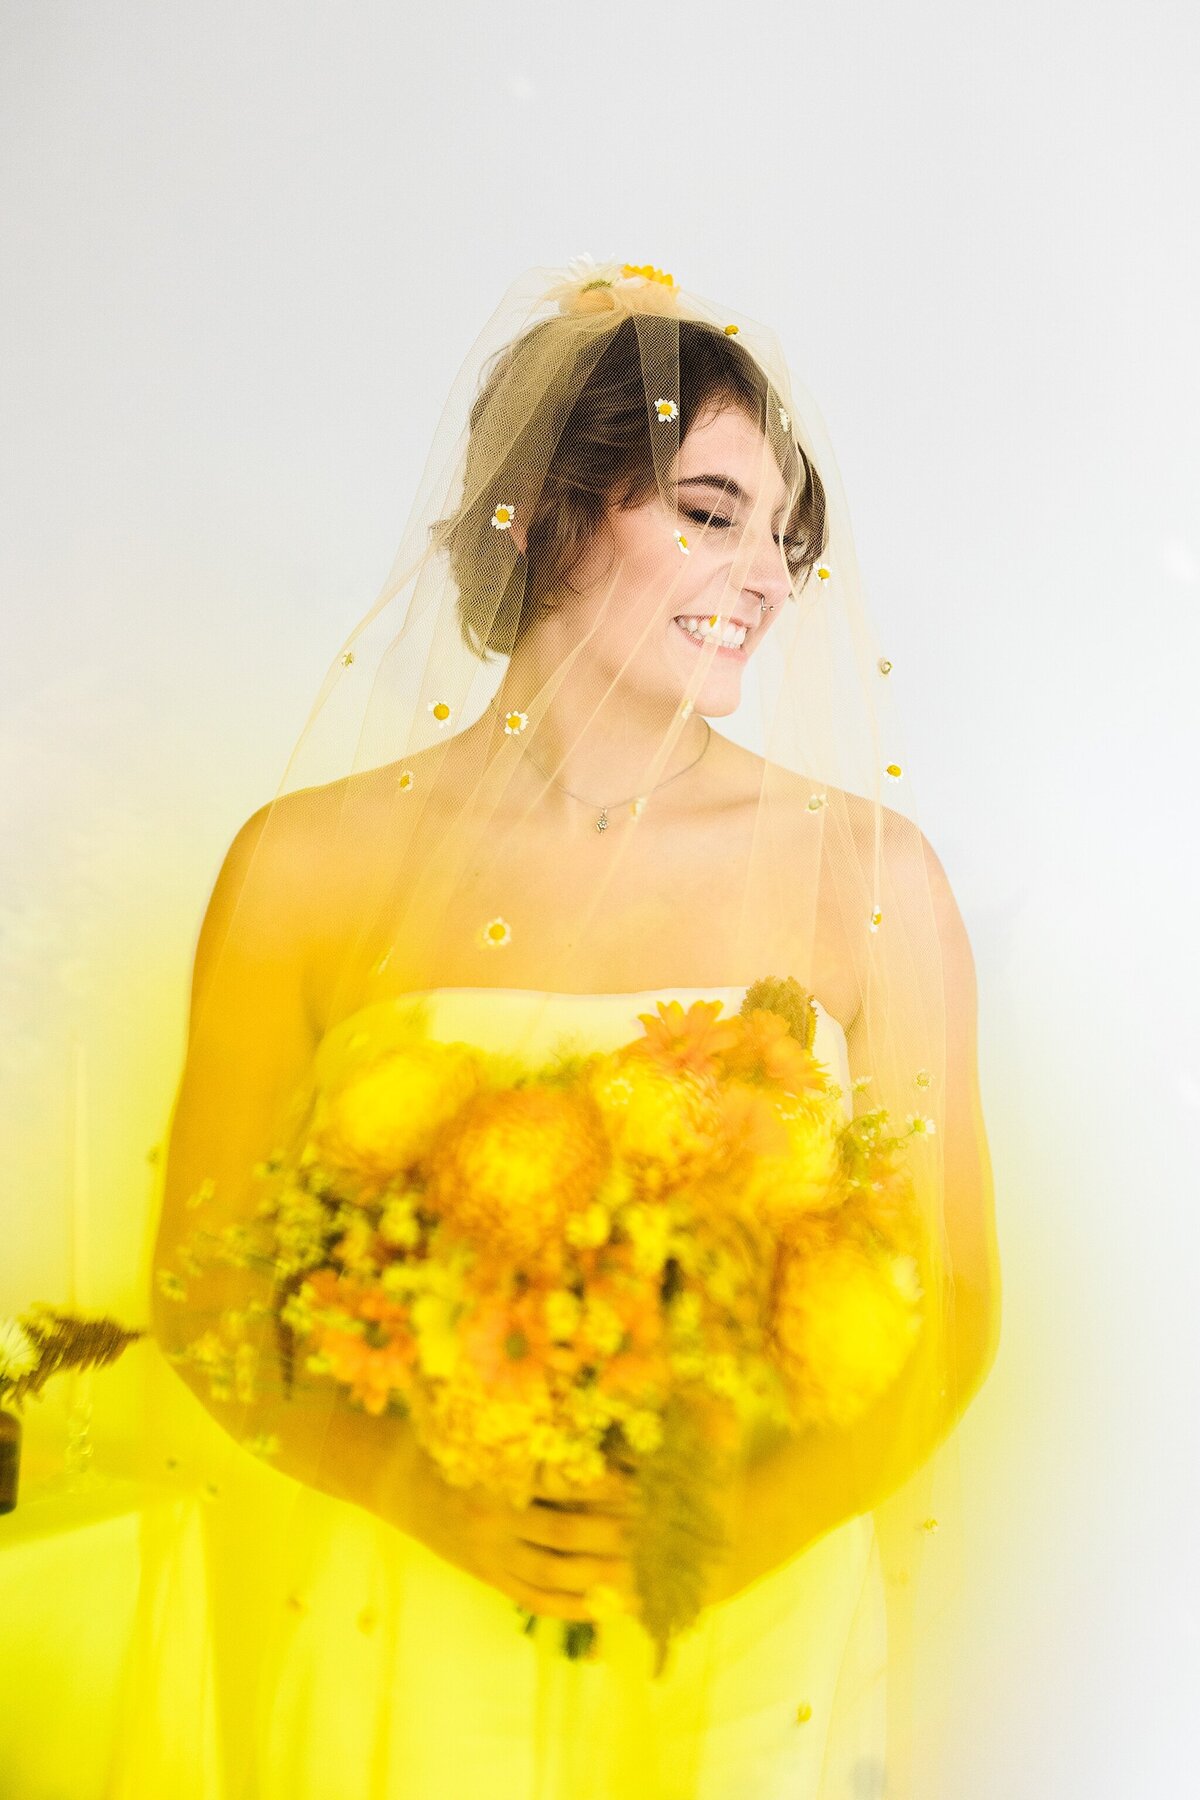 A portrait of a bride posing coyly on her wedding day in DFW, Texas. The bride is wearing a sleeveless white dress with a veil and is holding a bouquet in front of a white background. However, due to a colorful cube being held up in front of the camera lens, the dress (and overall ambiance) appears to be yellow.